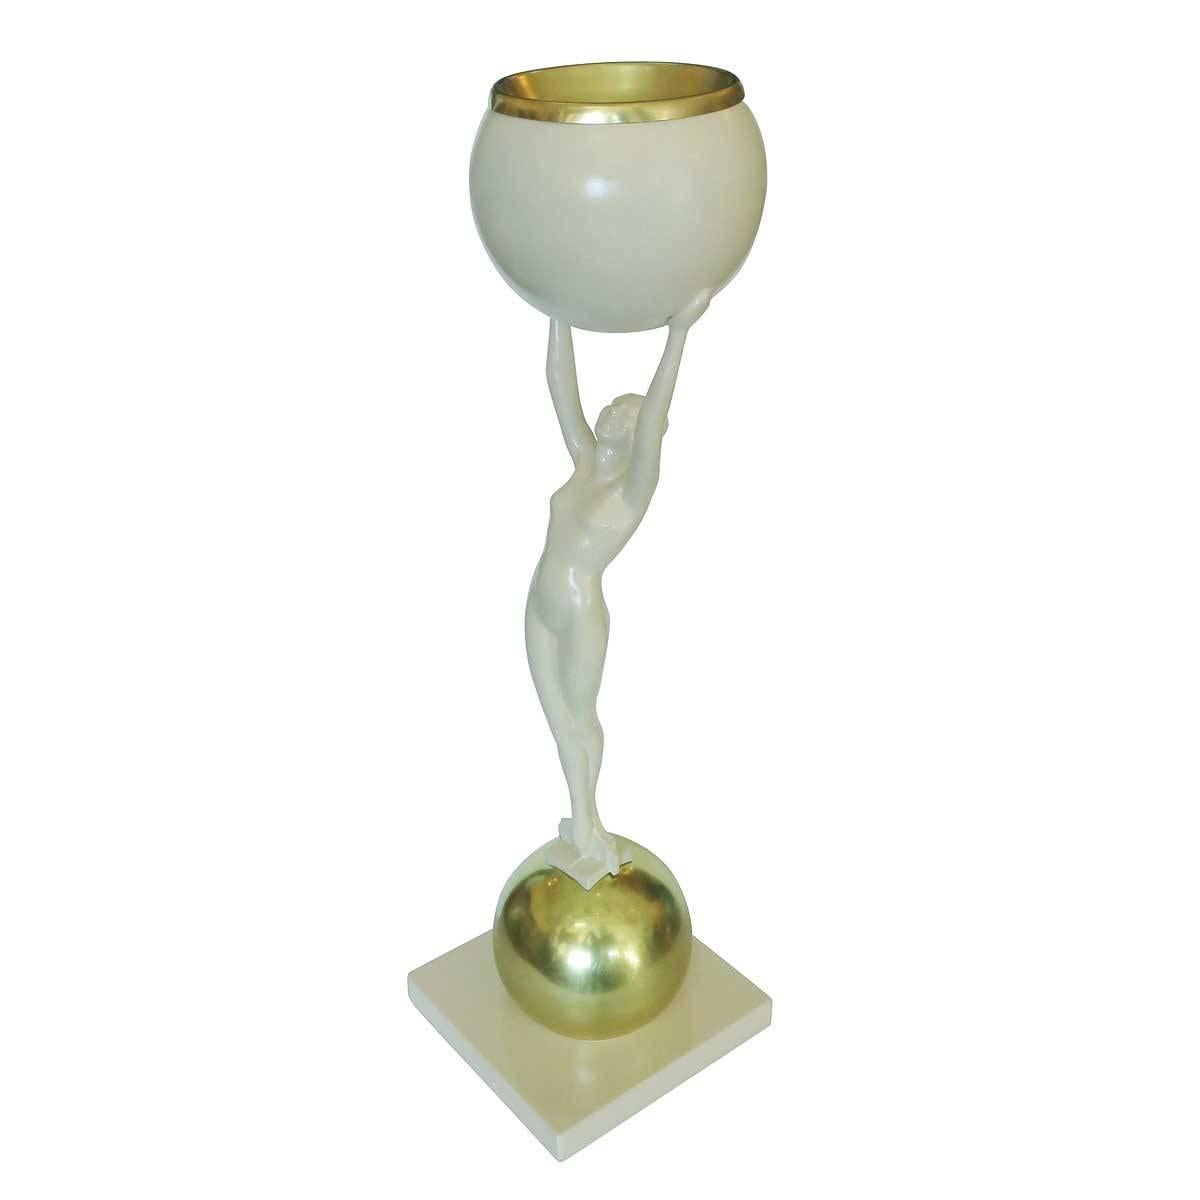 Frankart-style cocktail smoker pair featuring a nude female figure standing on top of a brass ball holding a beige ball with a removable brass ashtray along the top.

Dimensions: 28